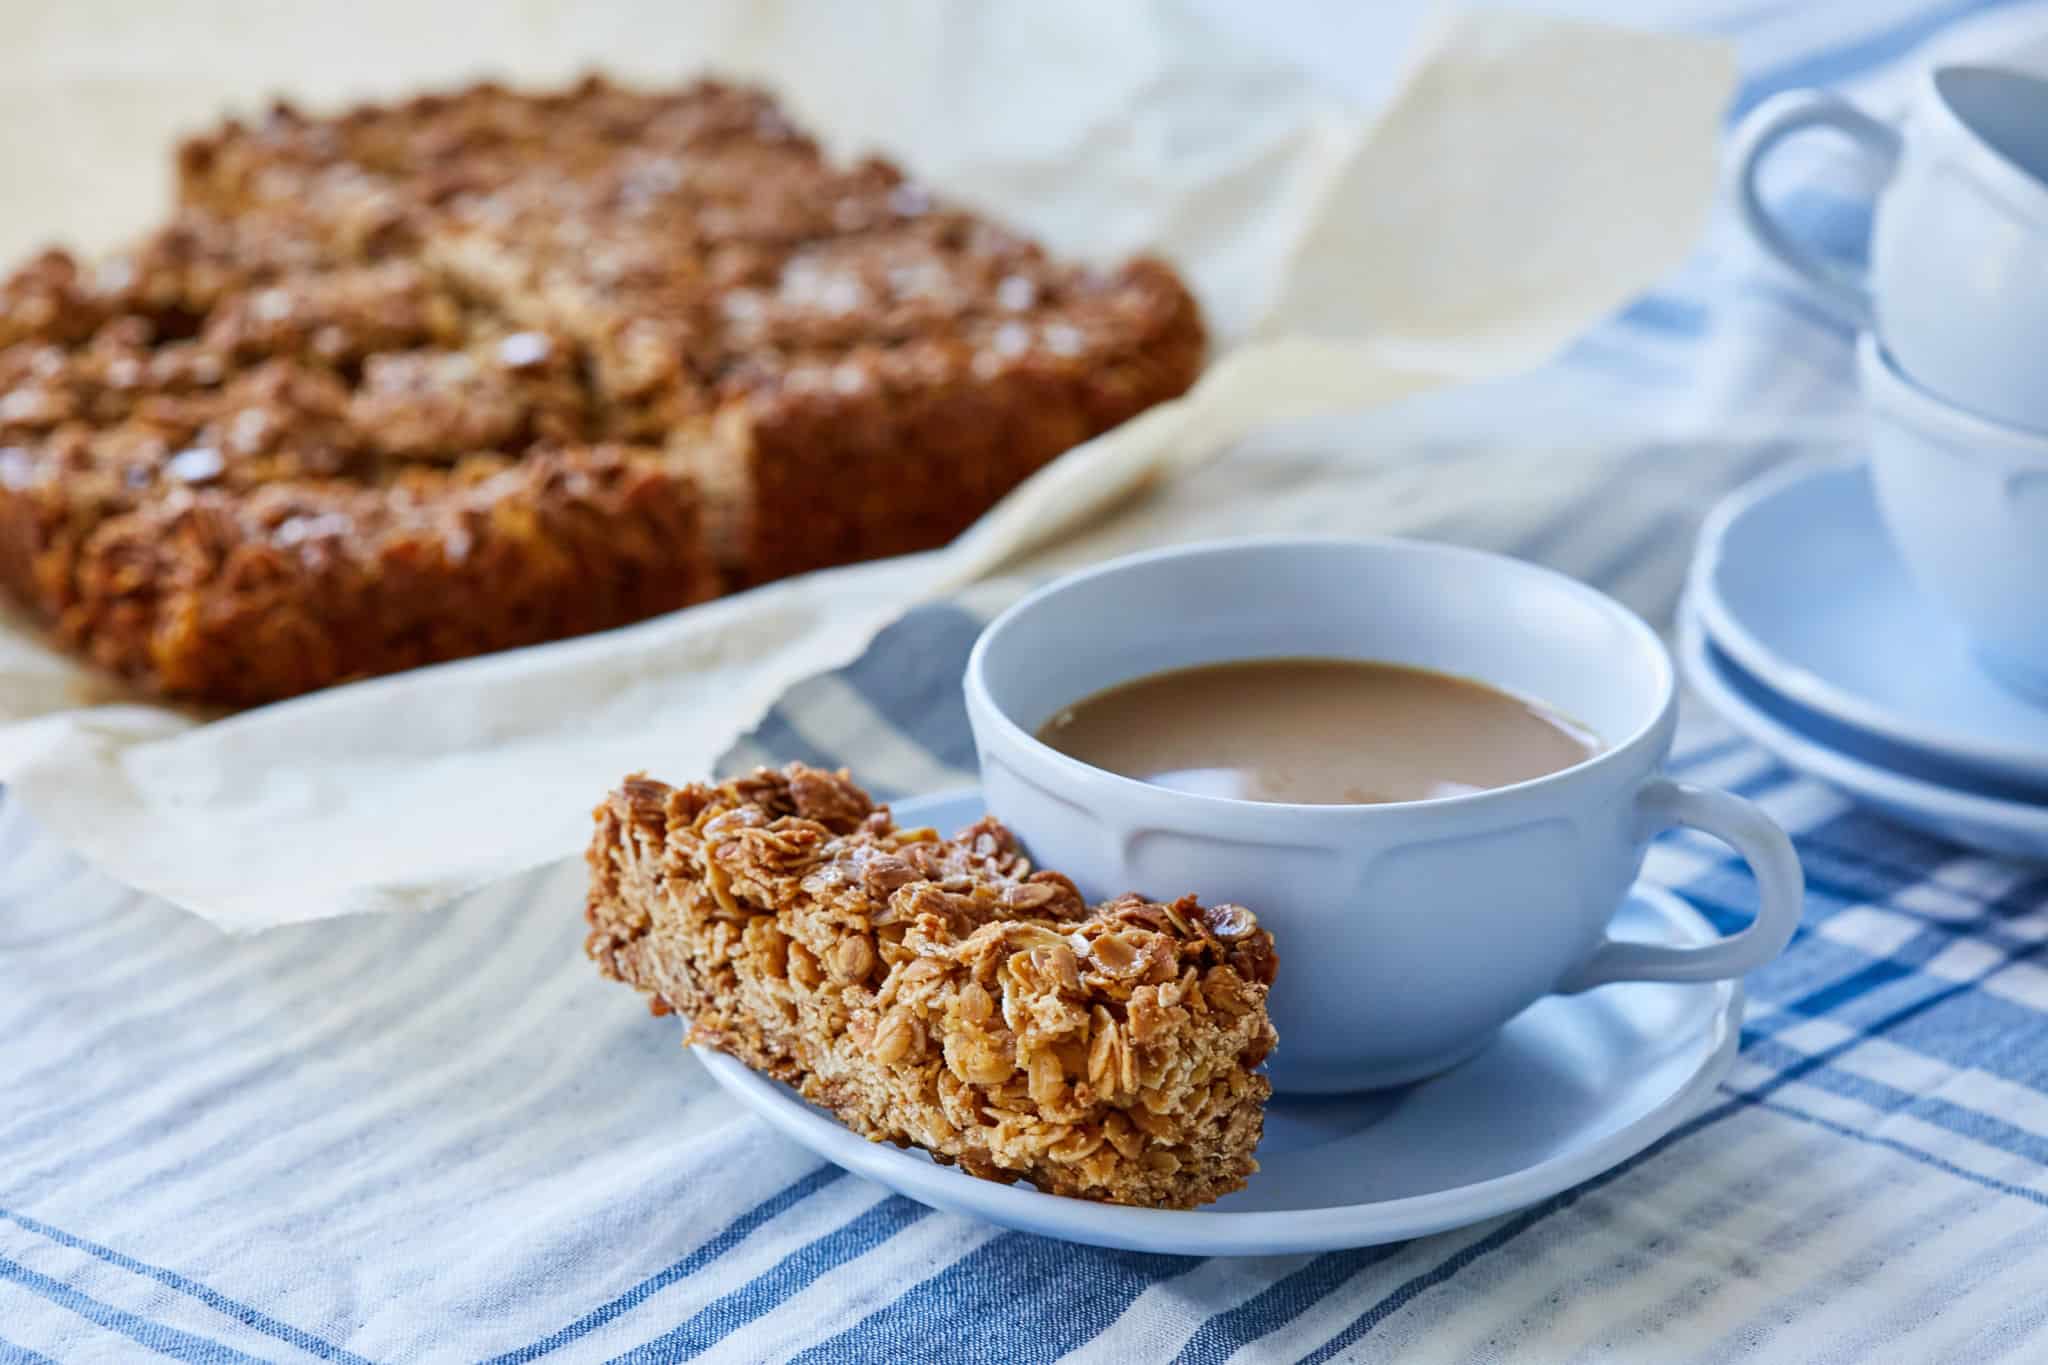 A serving of Traditional Irish Oat Flapjacks is served next to a cup of tea.